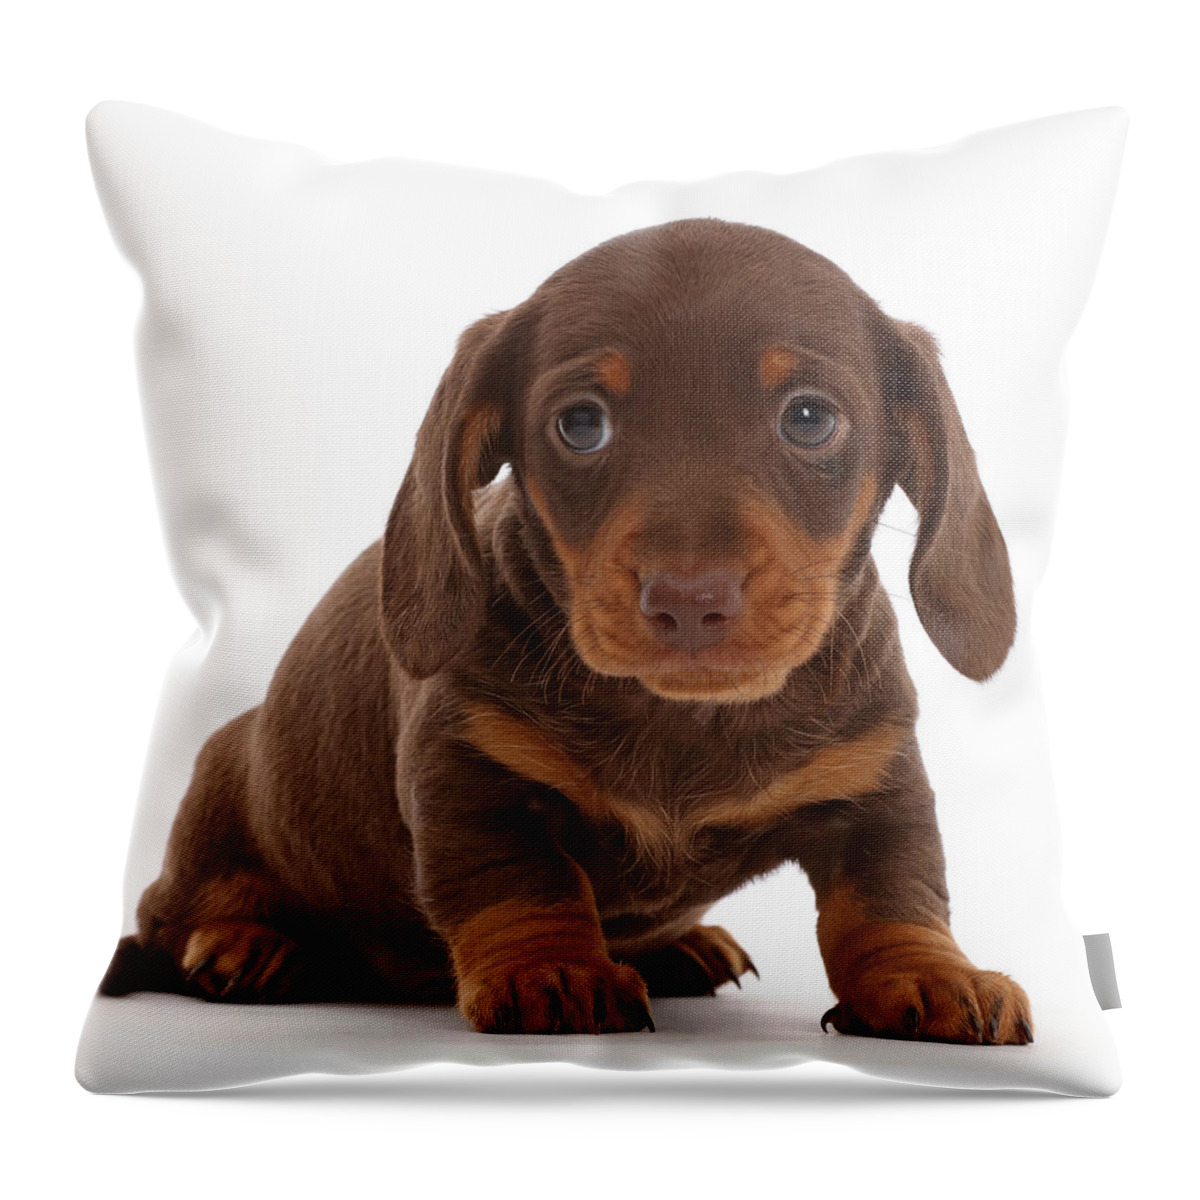 Dachshund Throw Pillow featuring the photograph Chocolate Dachshund Puppy by Mark Taylor